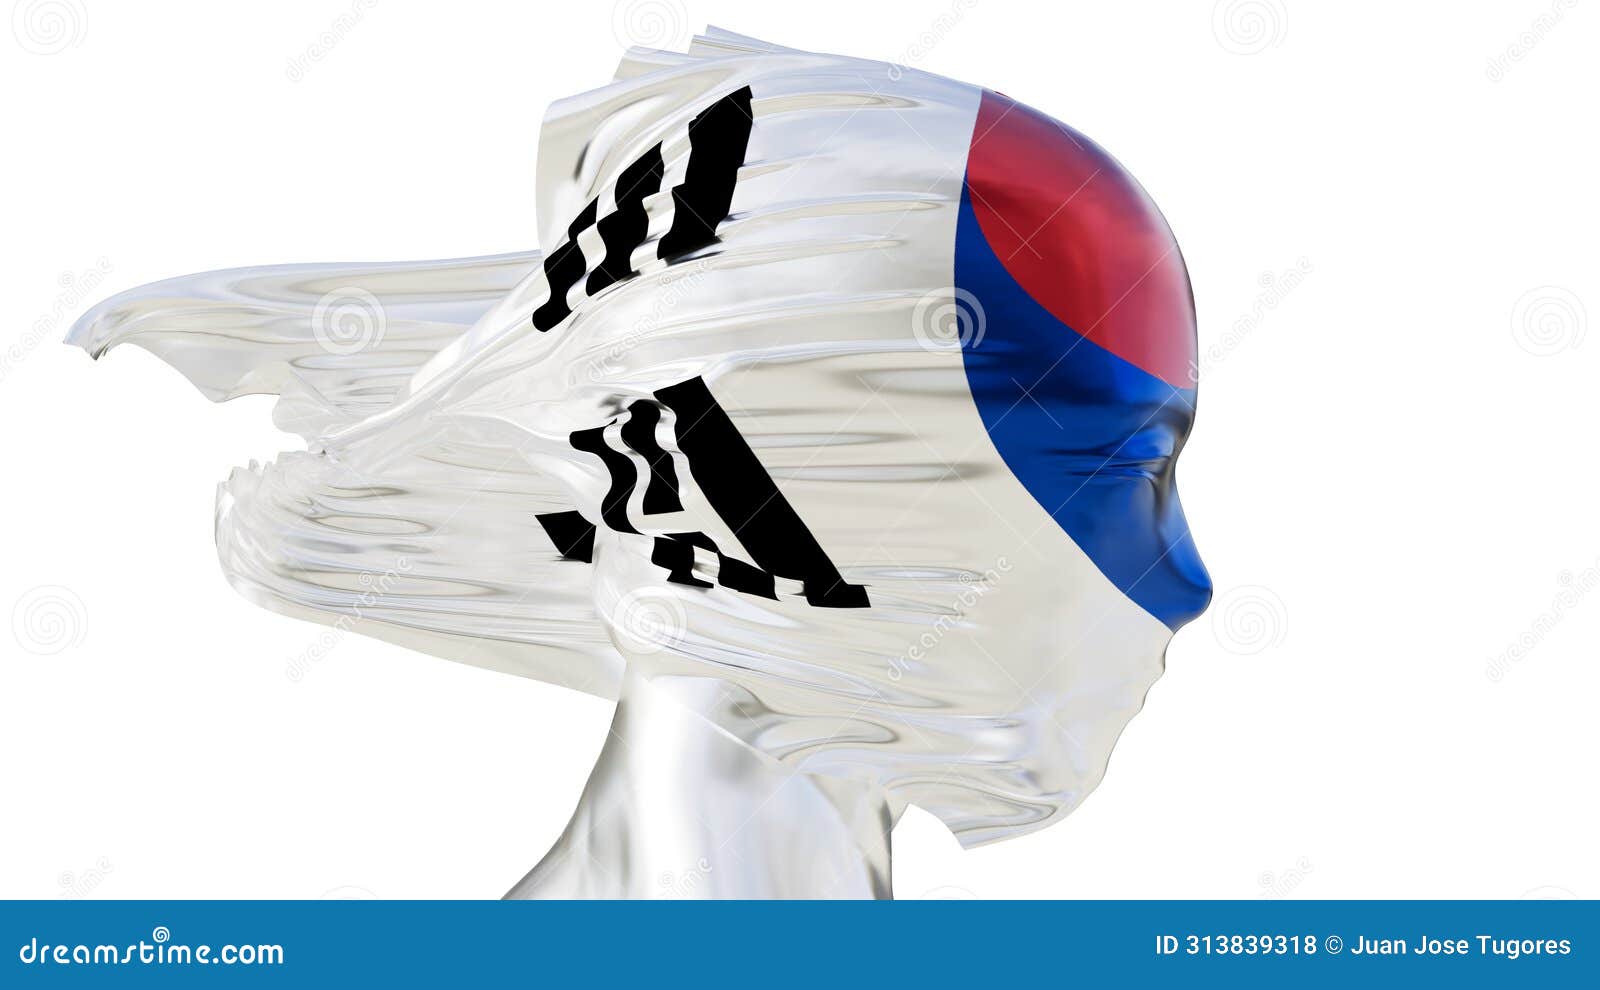 dynamic swirls of the south korean flag in abstract representation